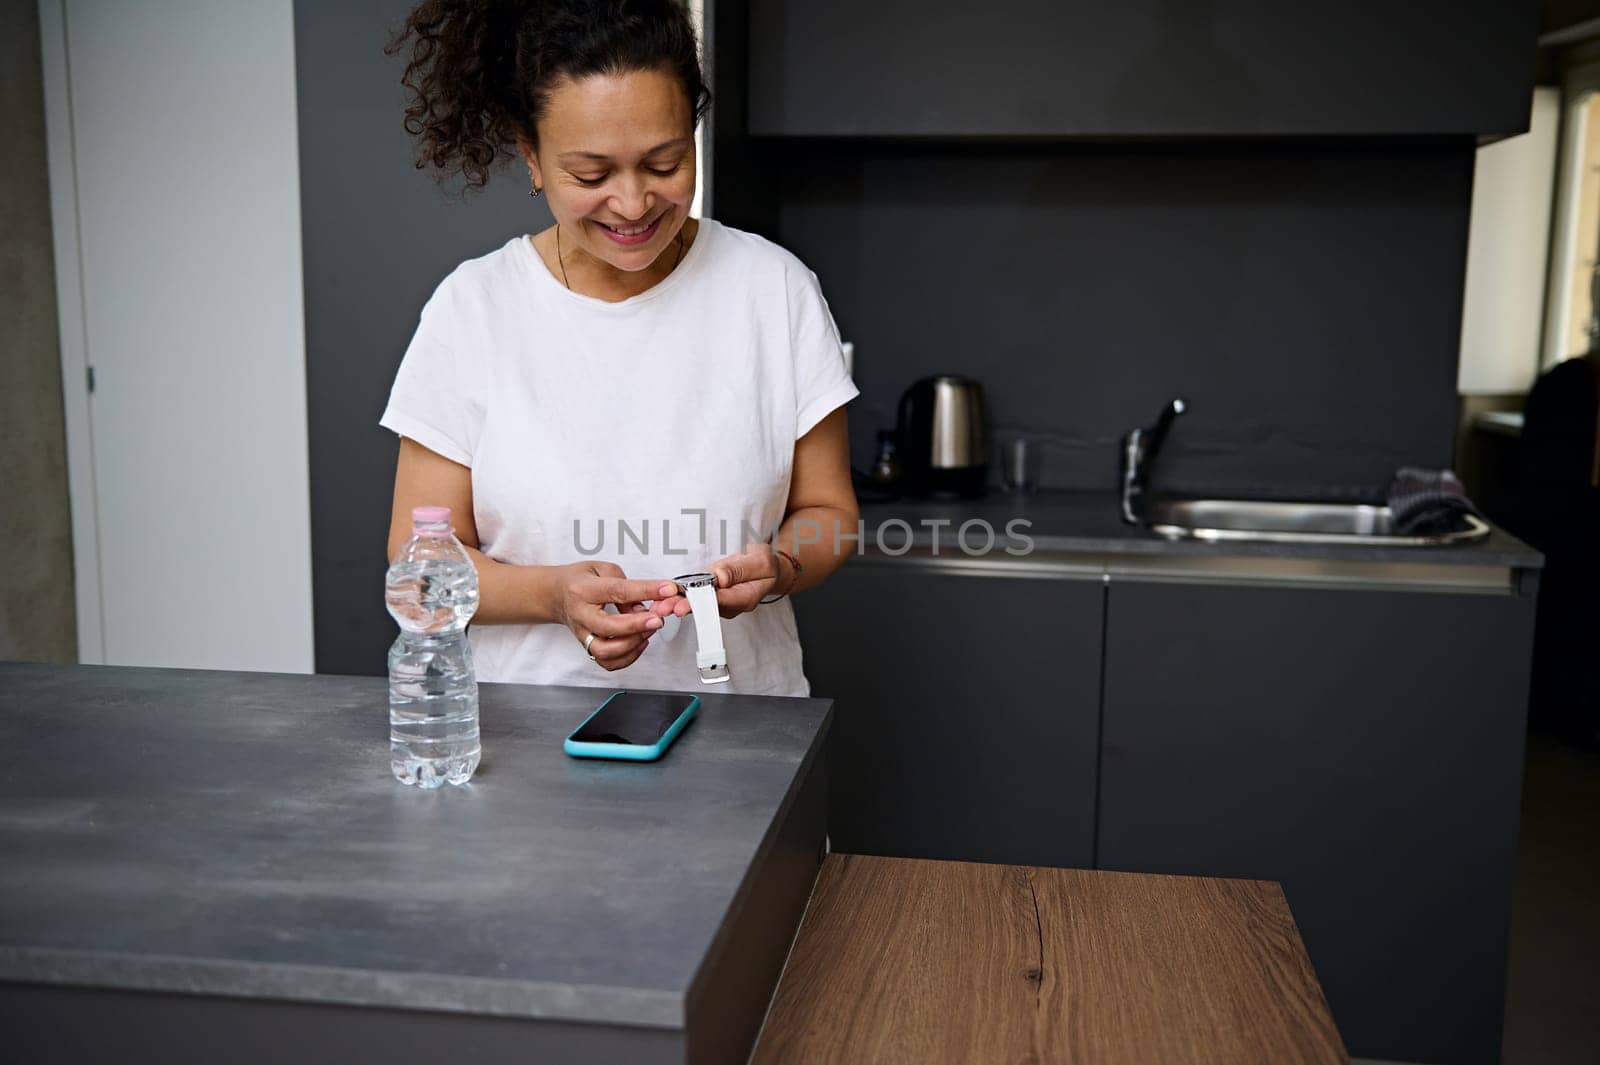 Smiling pretty woman in white t-shirt holding modern smart wrist watch with black mockup digital screen, standing at kitchen counter in the minimalist home interior. Copy space for advertising text.